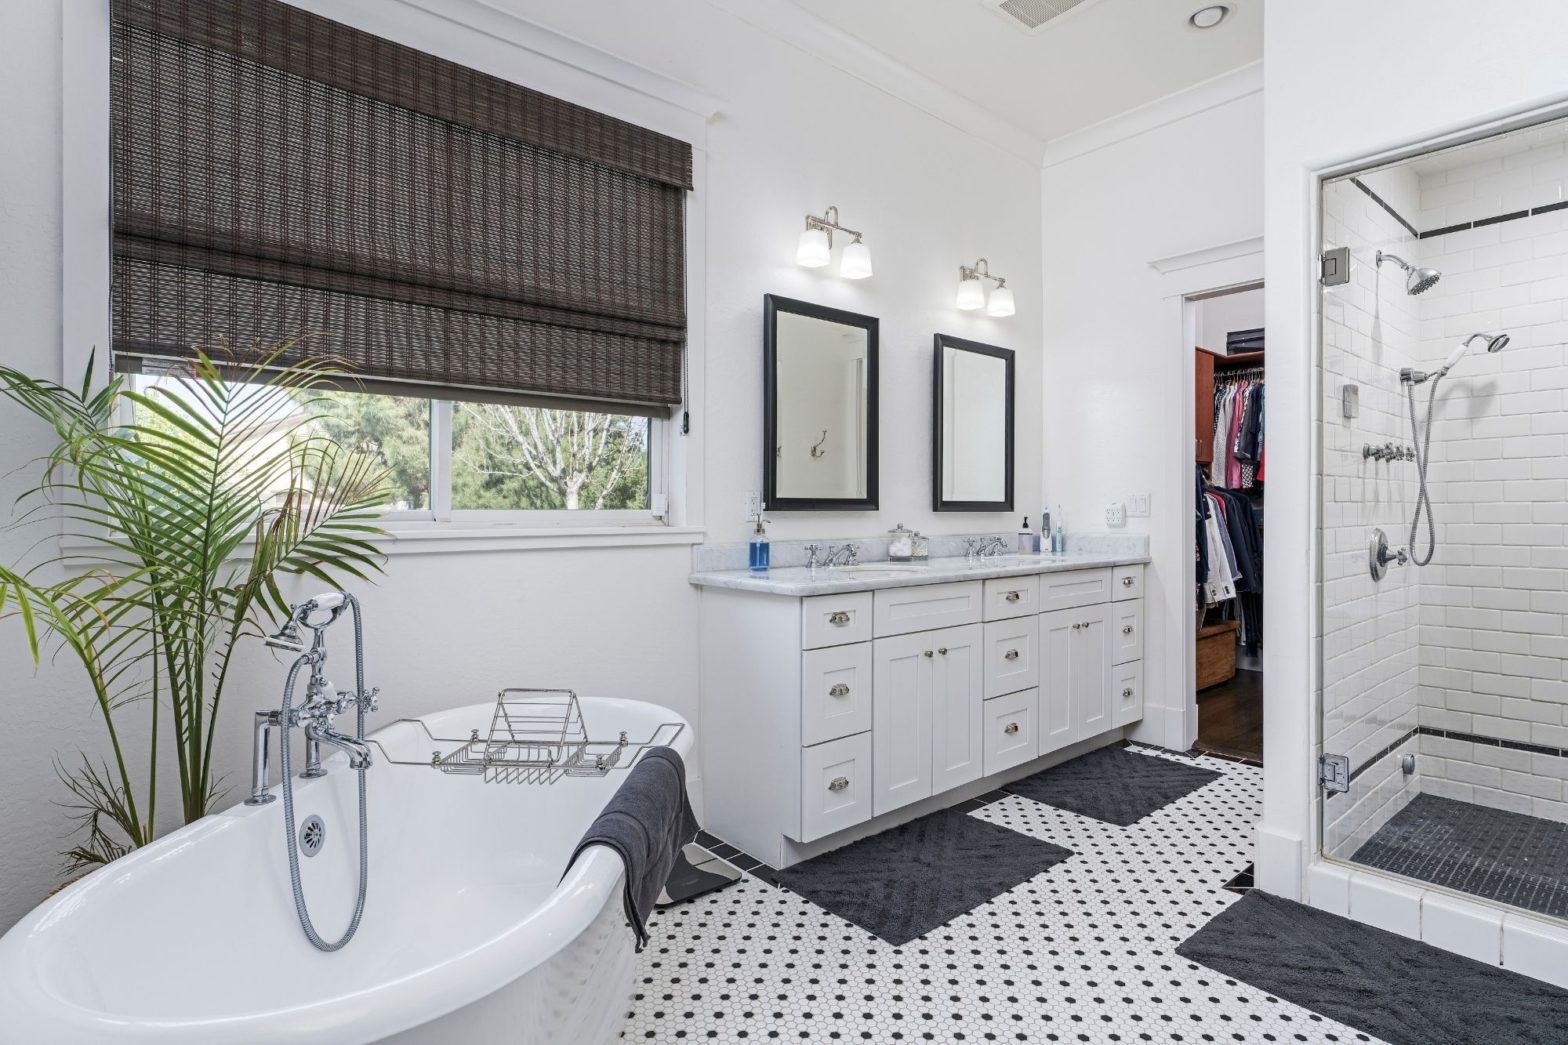 Realize your dream of a new bathroom with your Portland bathroom remodeling experts.